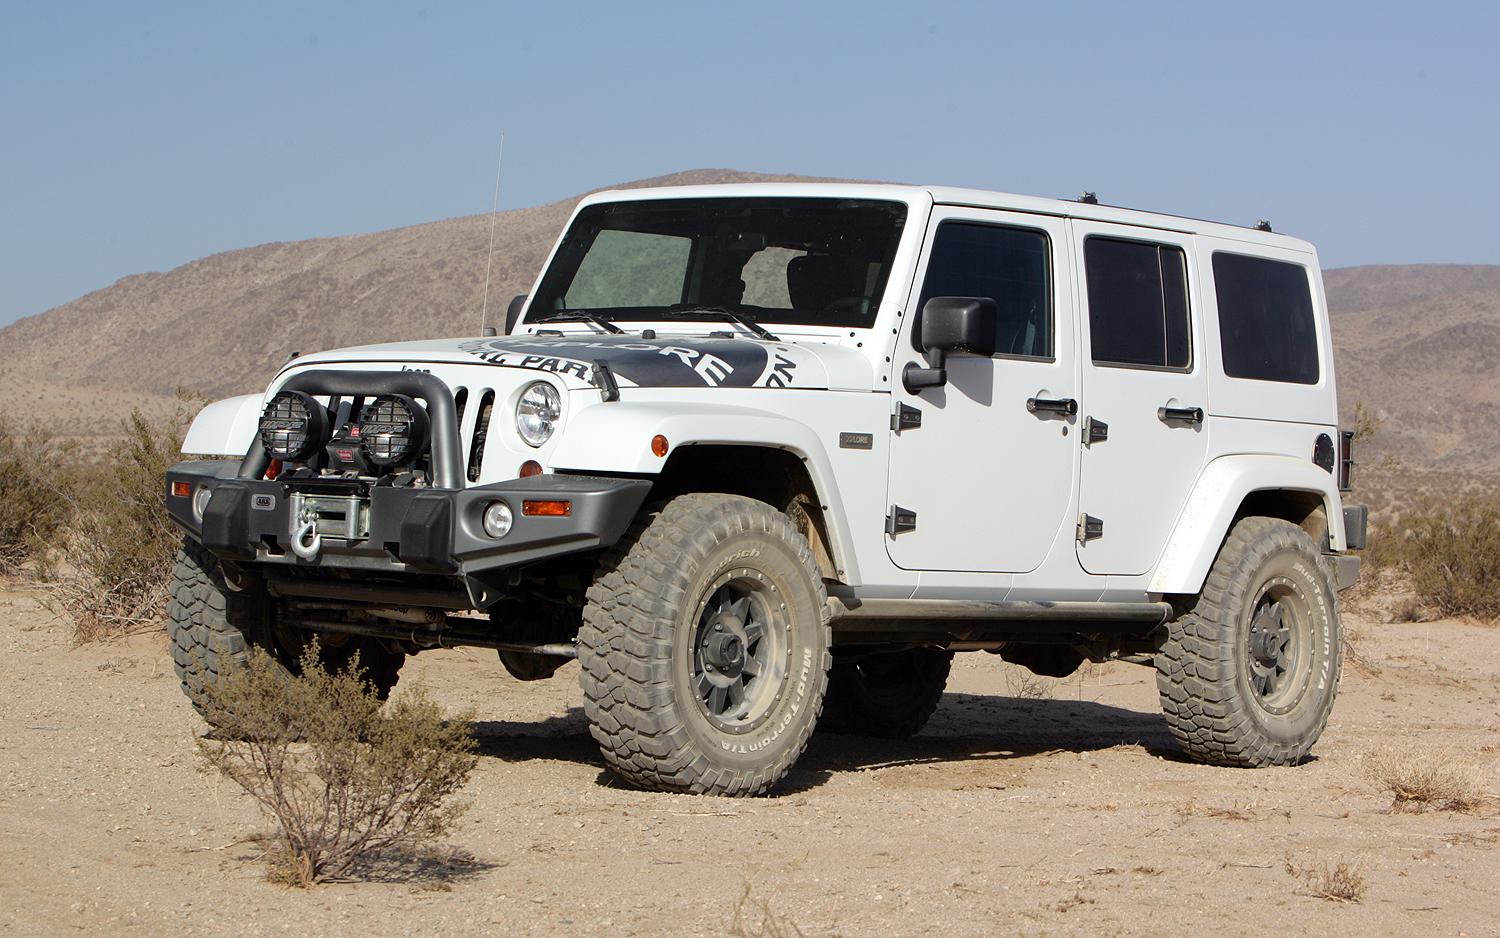 Jeep Wrangler Unlimited Rubicon photos, picture 8. size: 1500x938. 